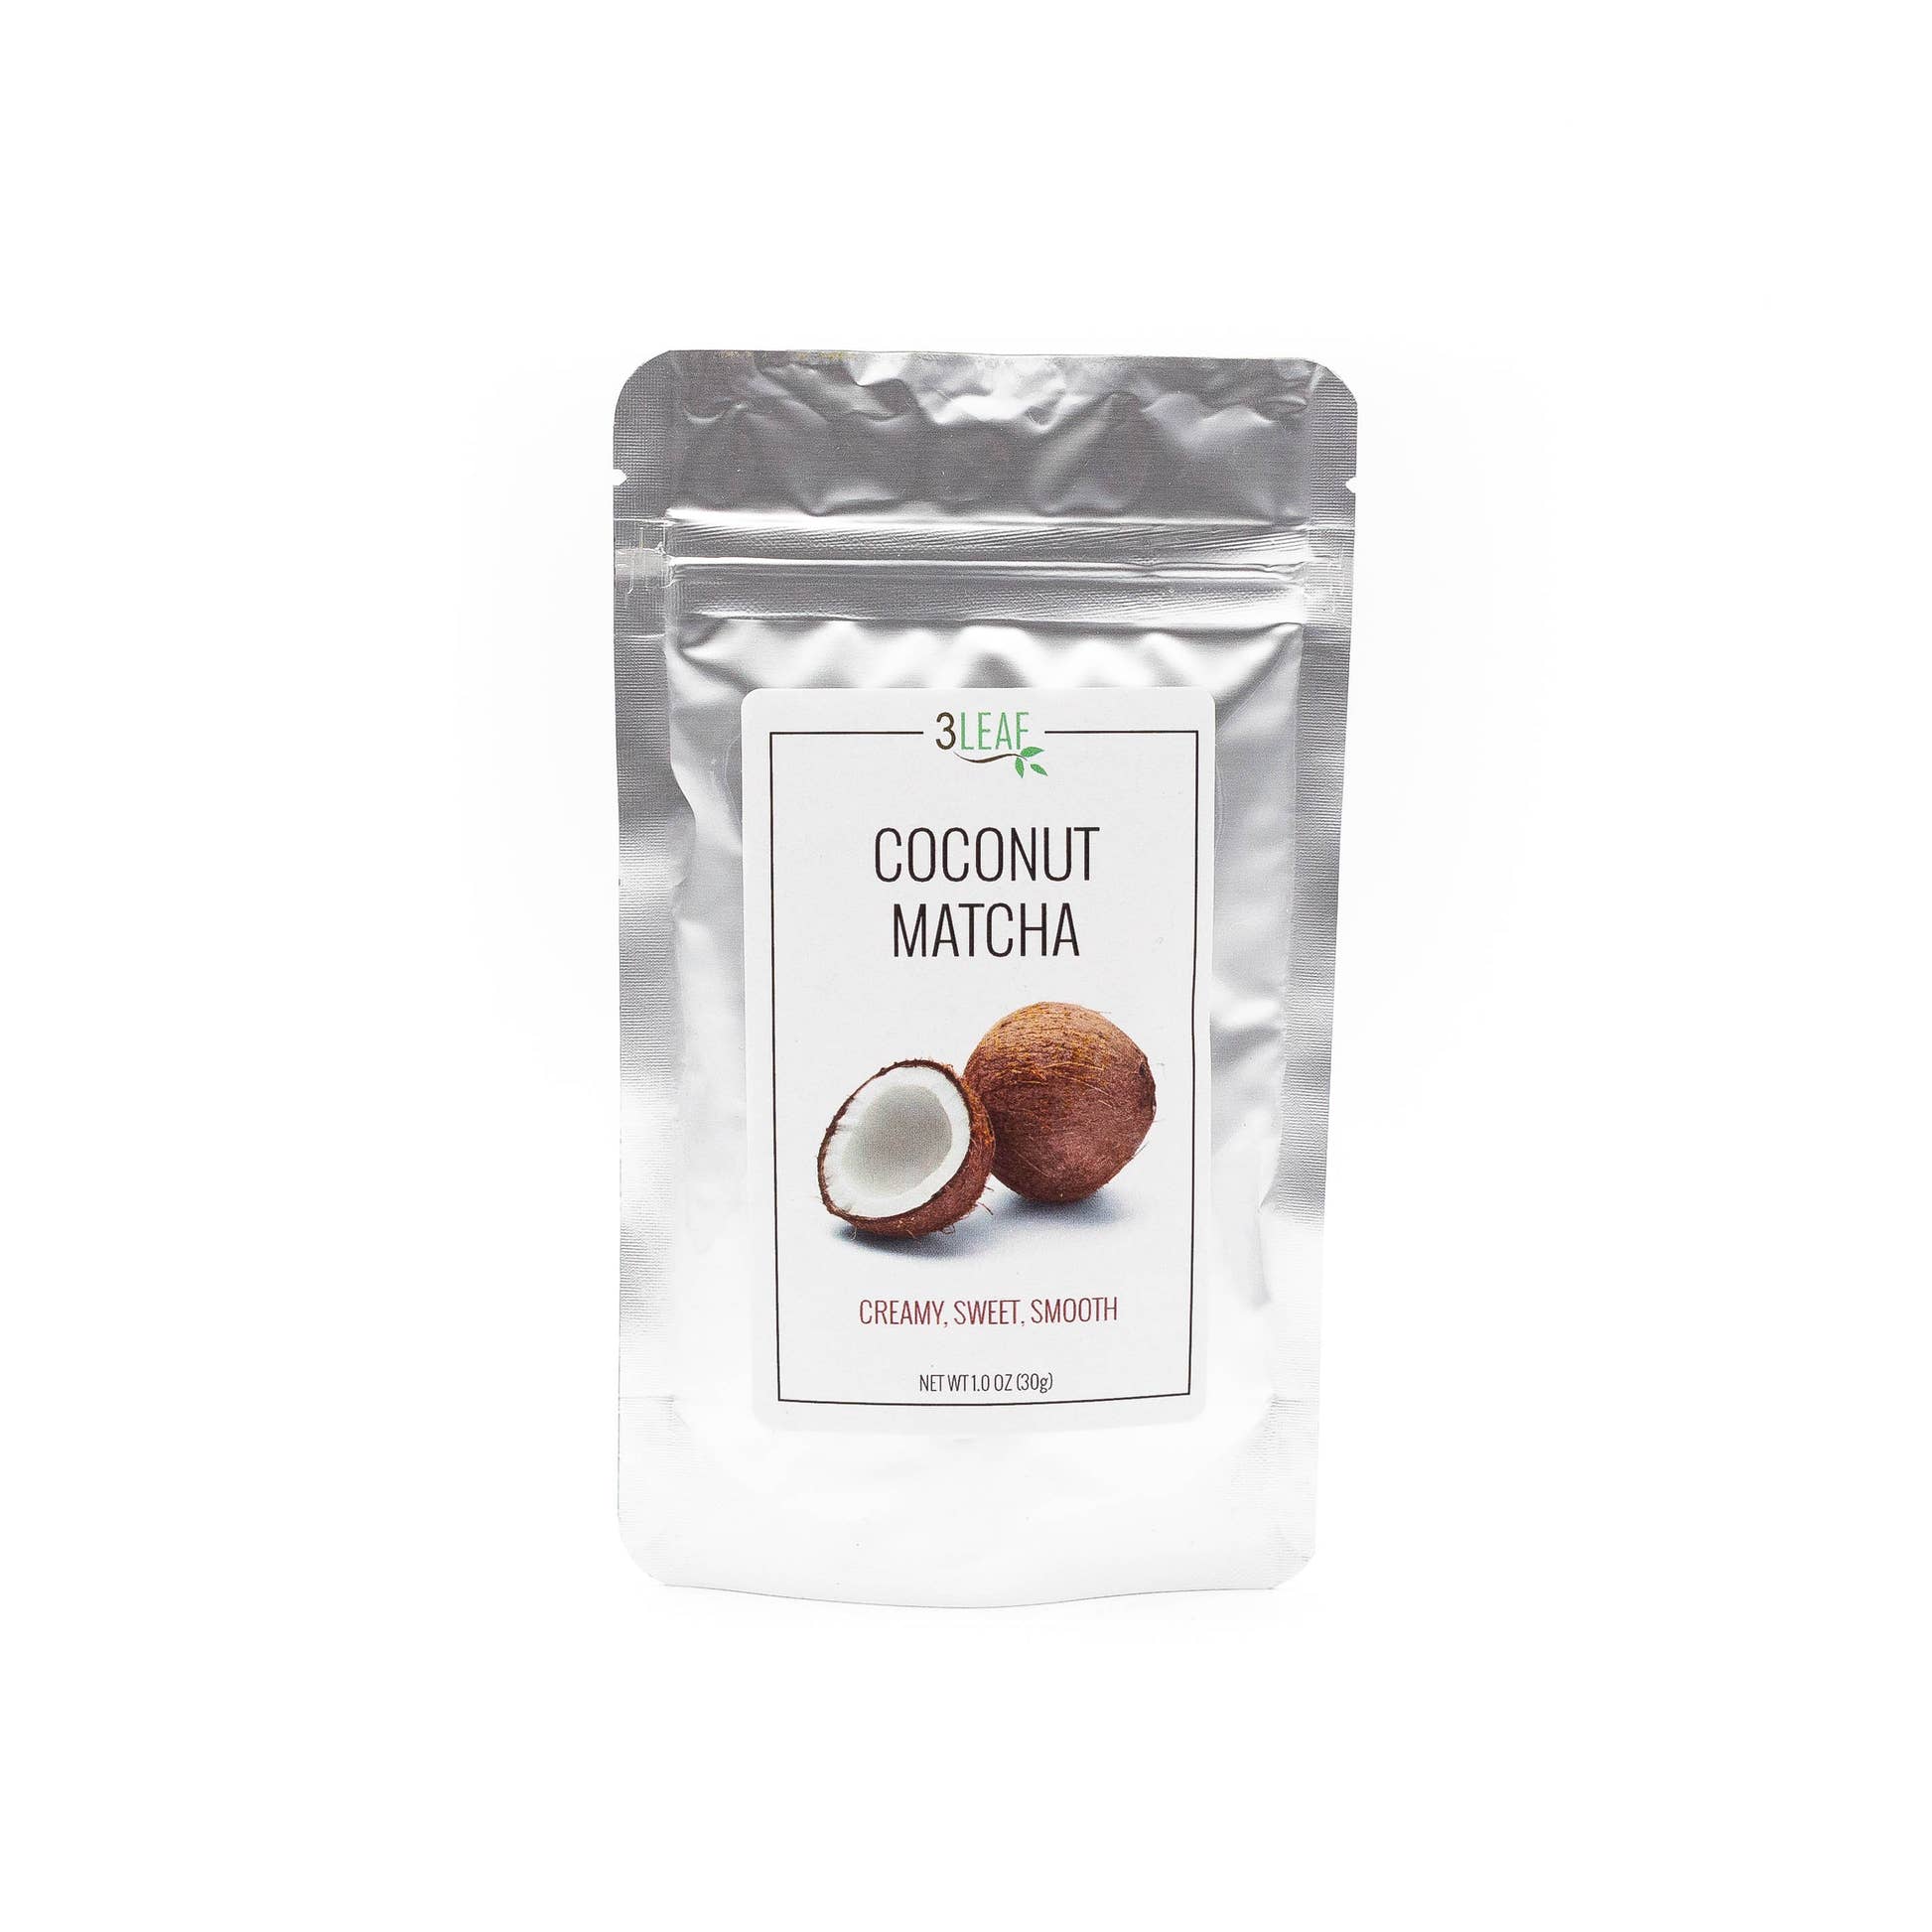 Silver pouch with 3 Leaf Coconut Matcha label with a coconut and tasting notes of creamy, sweet, and smooth